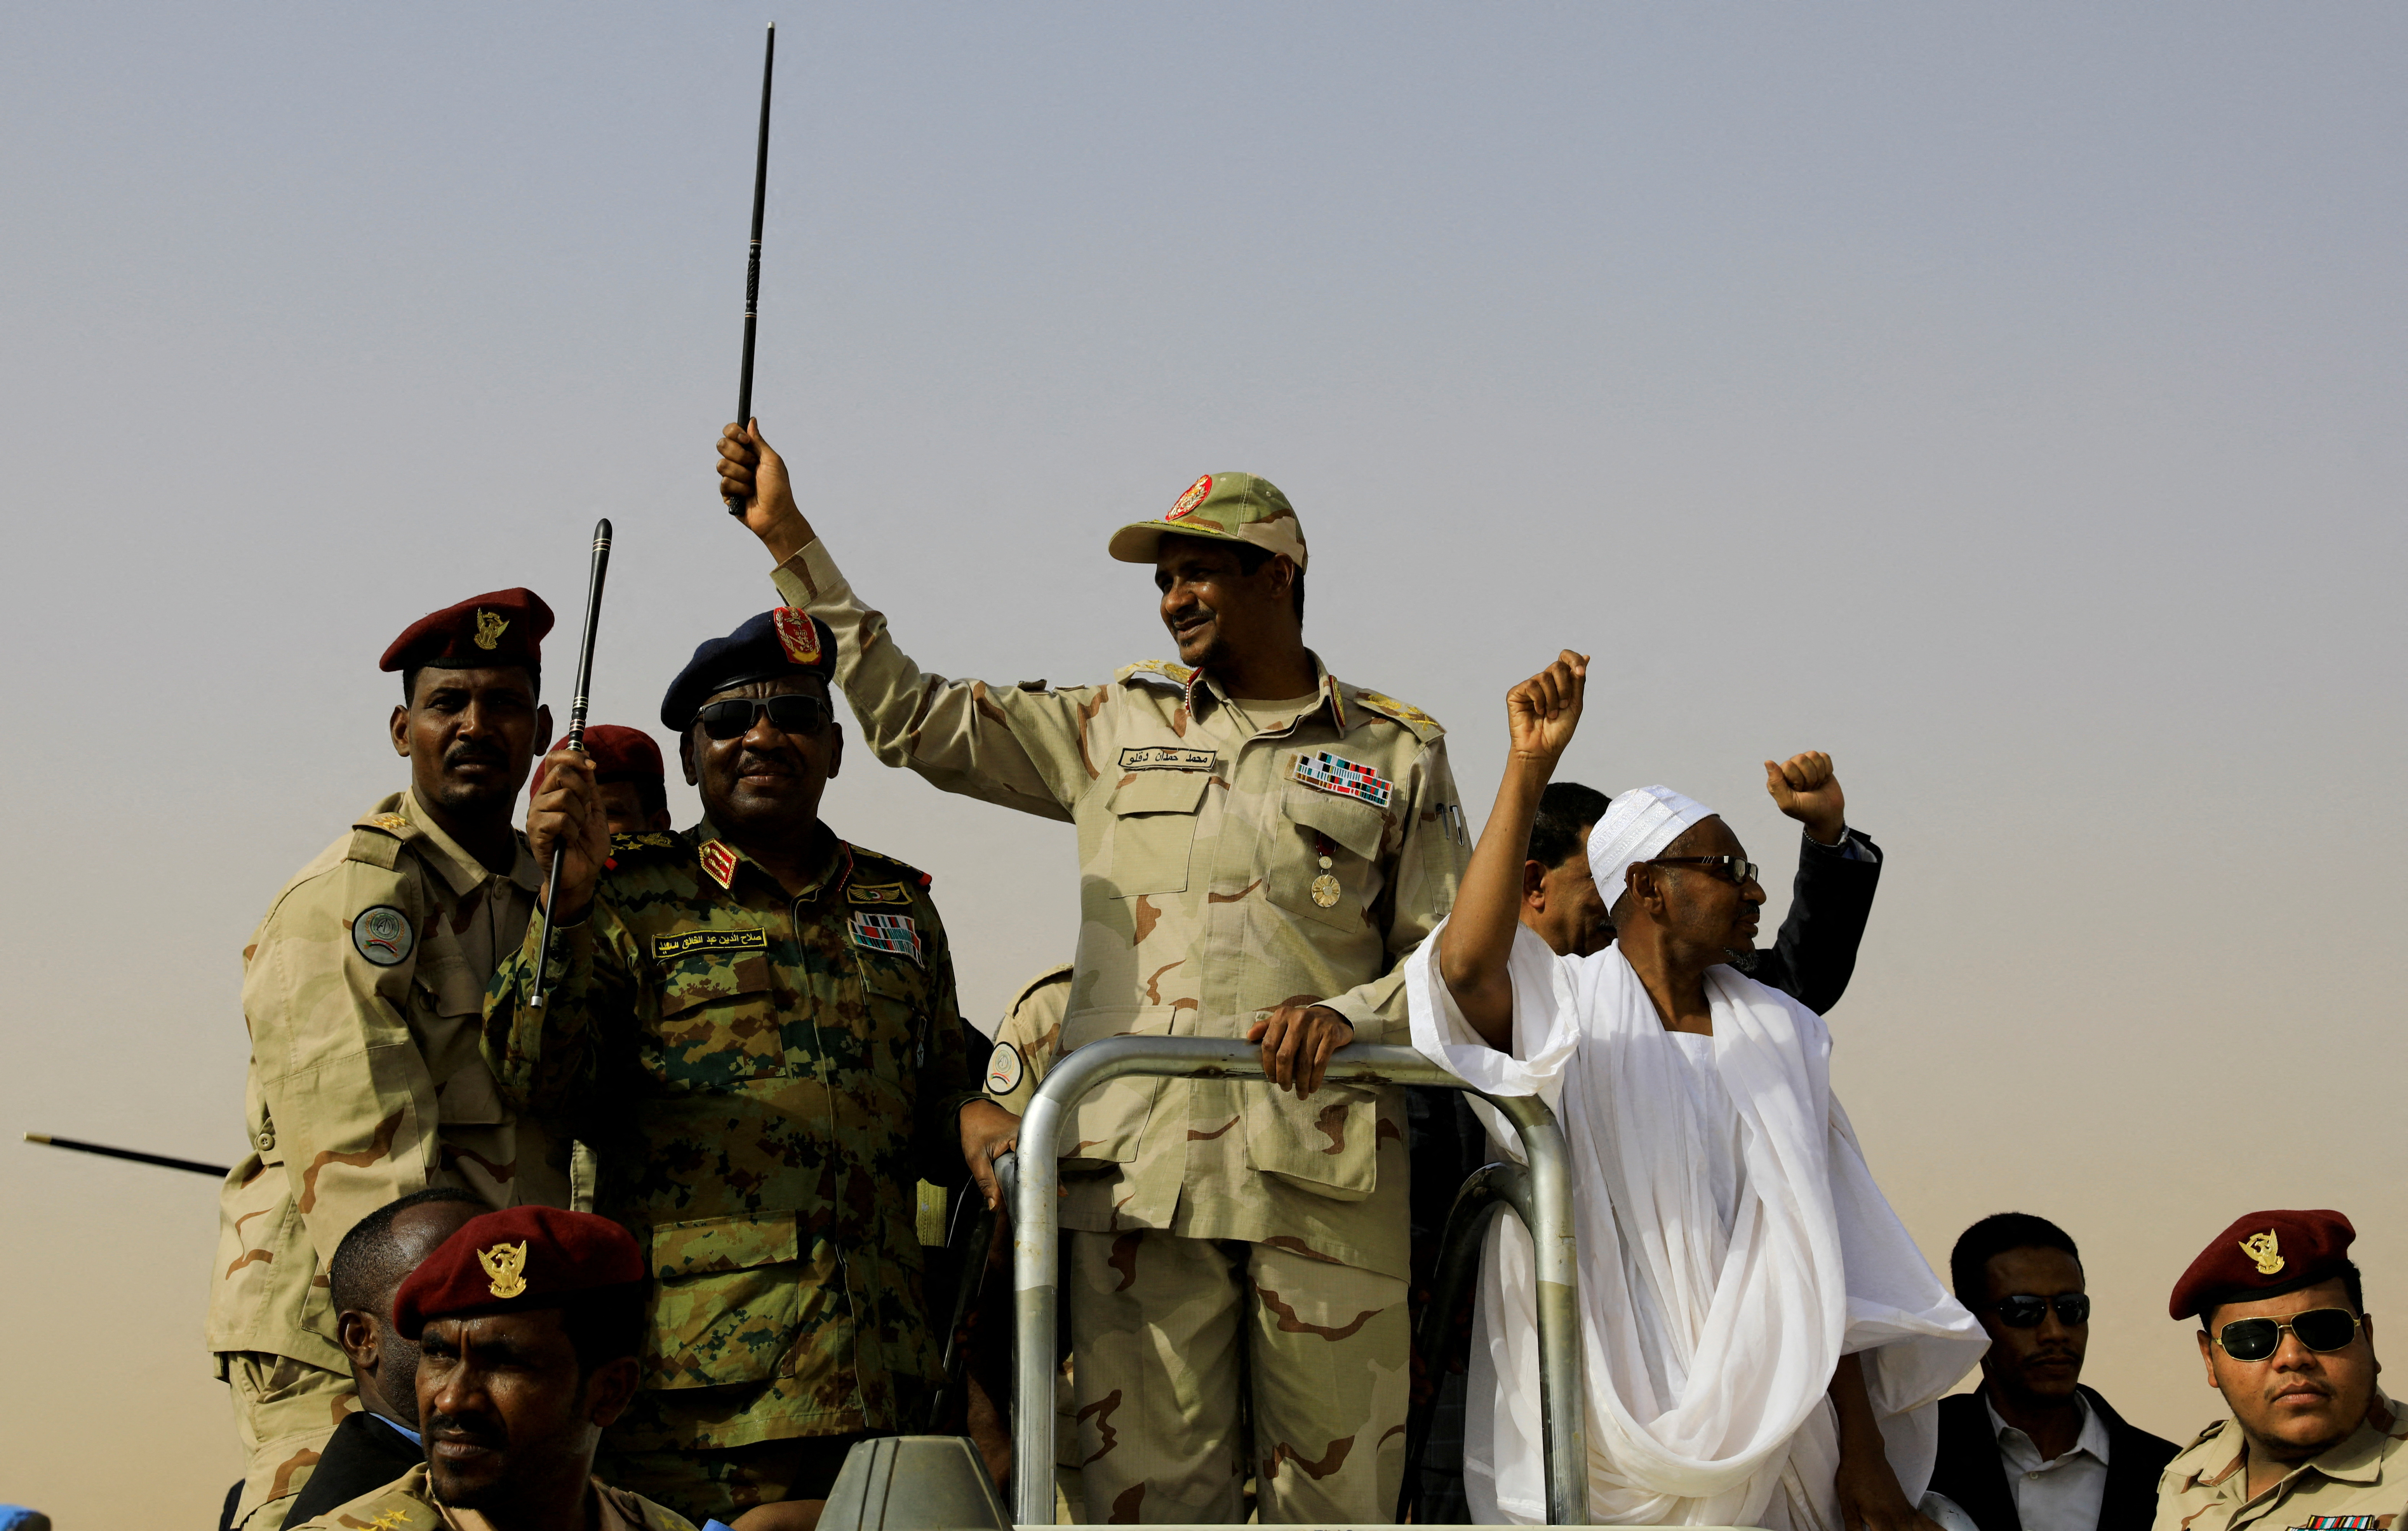 image Heavy gunfire quickly shatters Sudan truce pushed by US (Update)